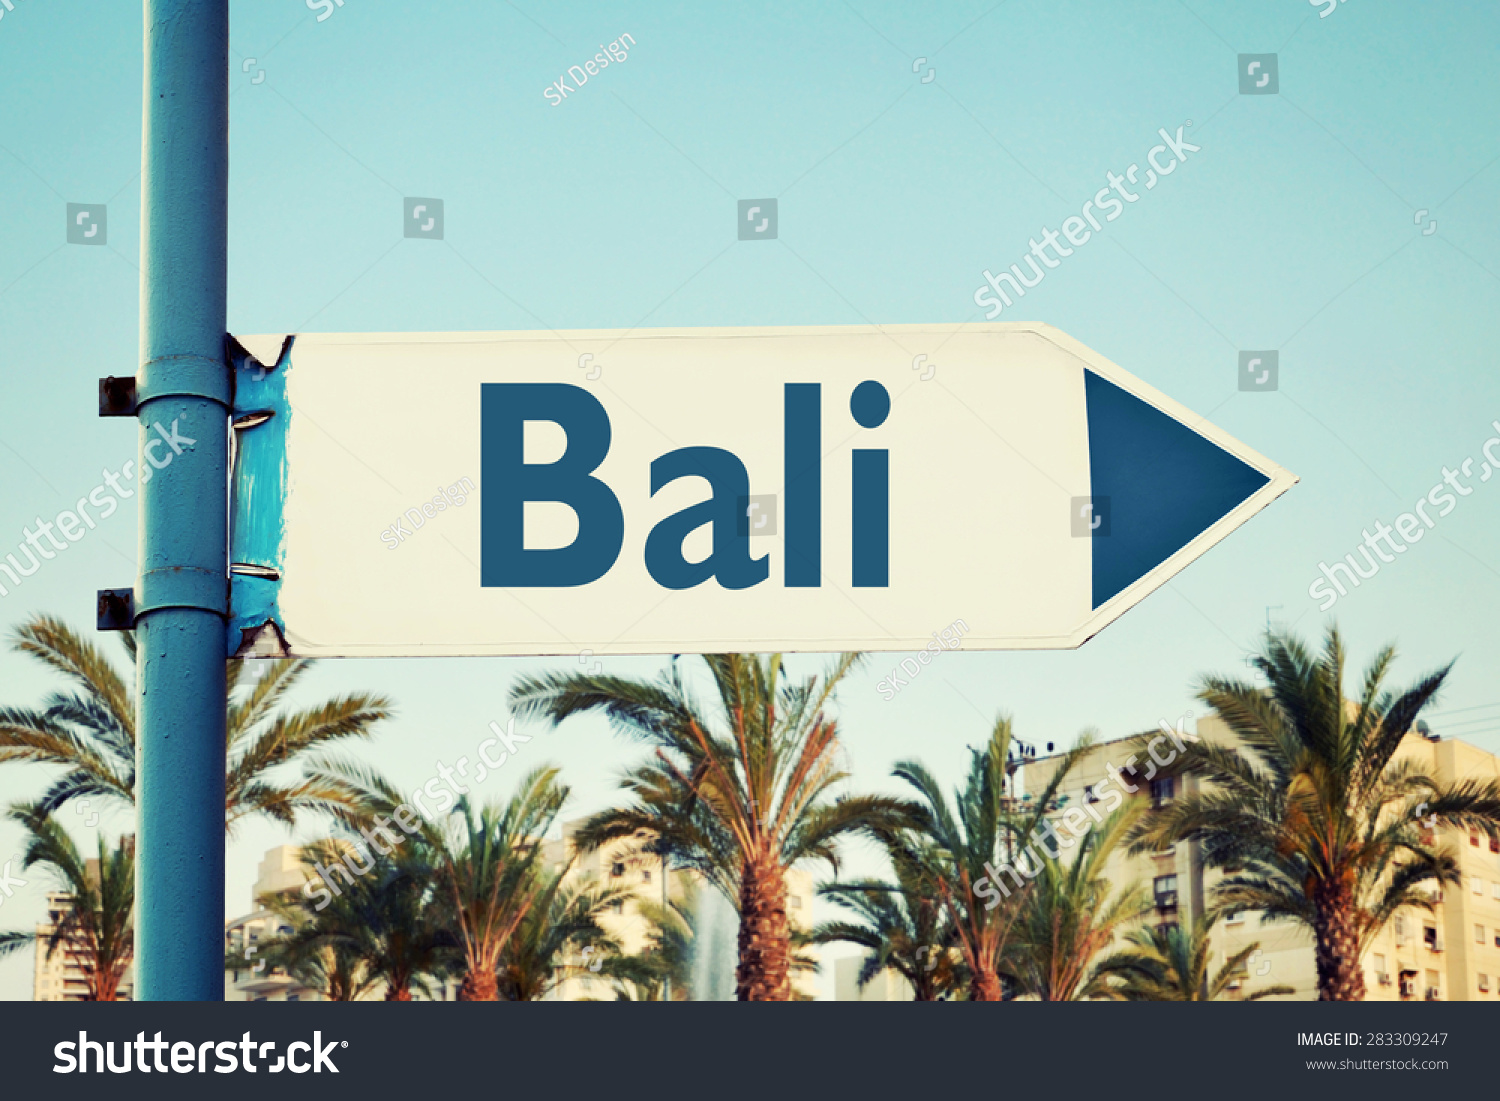  Bali Road Sign Travel Destinations Set Stock Photo    Things to do in Bali and Indonesia Travel Map: 35 BALI  NORSK